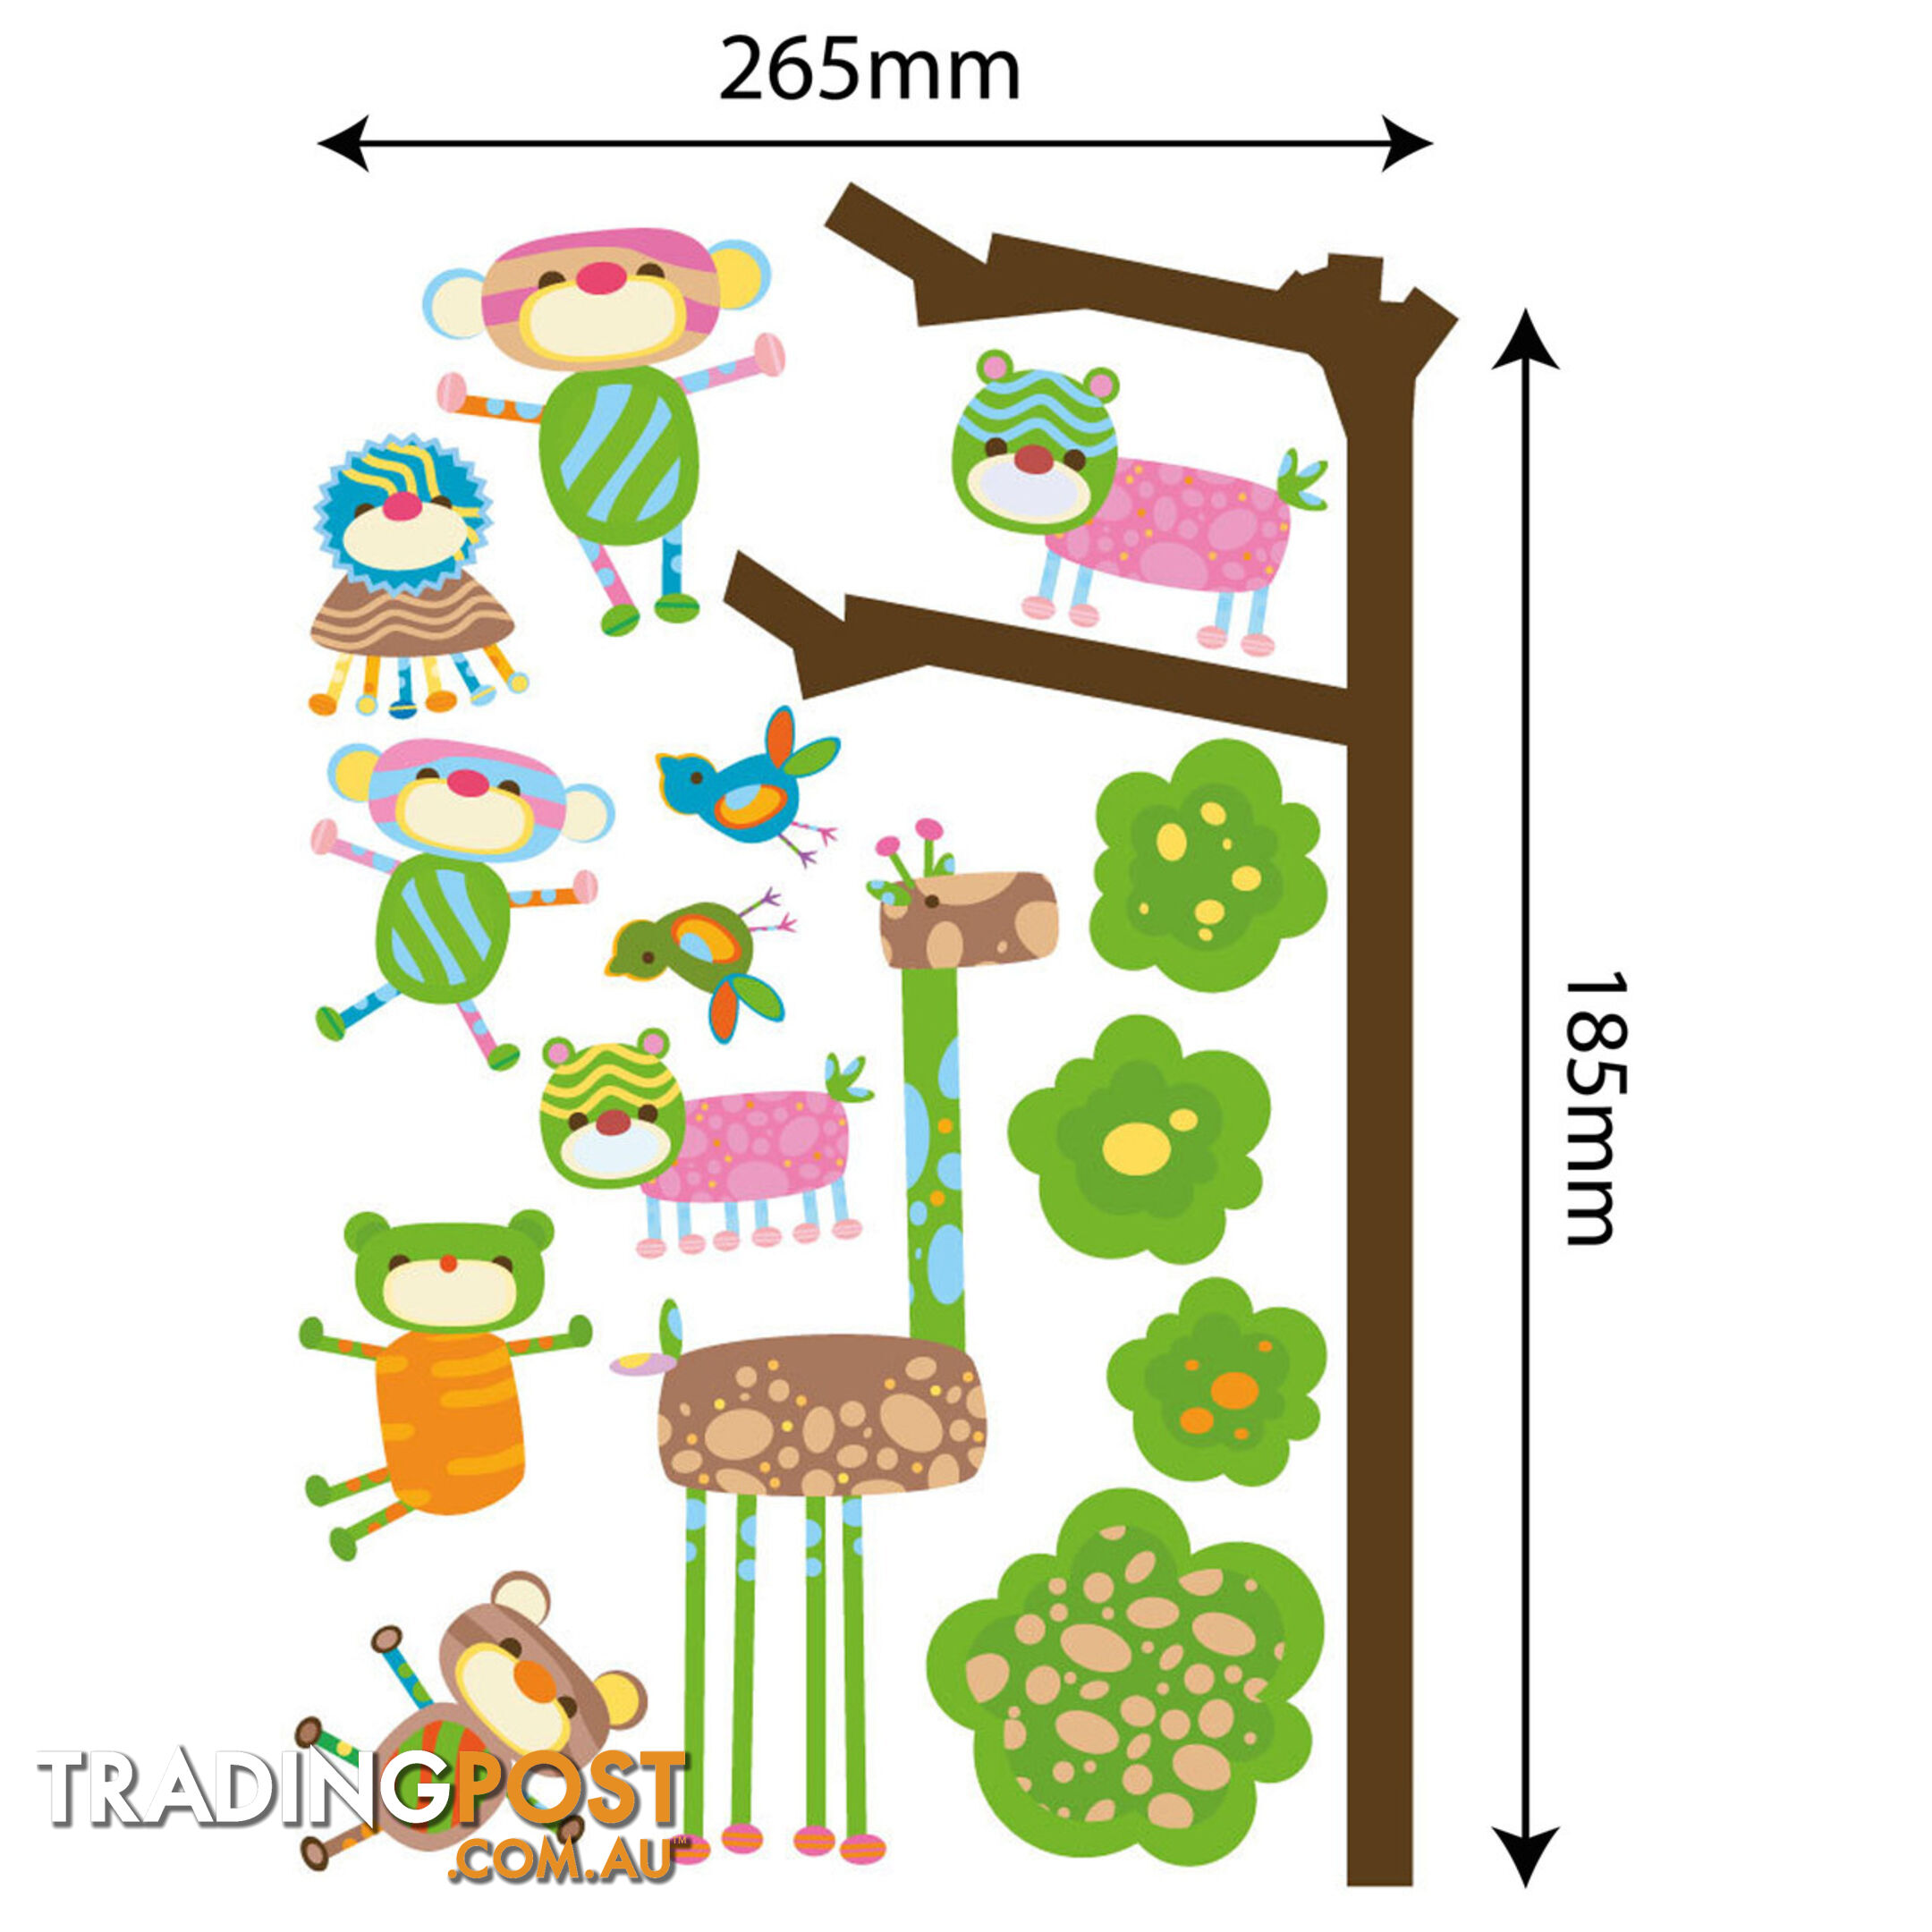 Medium Size Funky Monkeys in a Tree Wall Stickers  - Totally movable